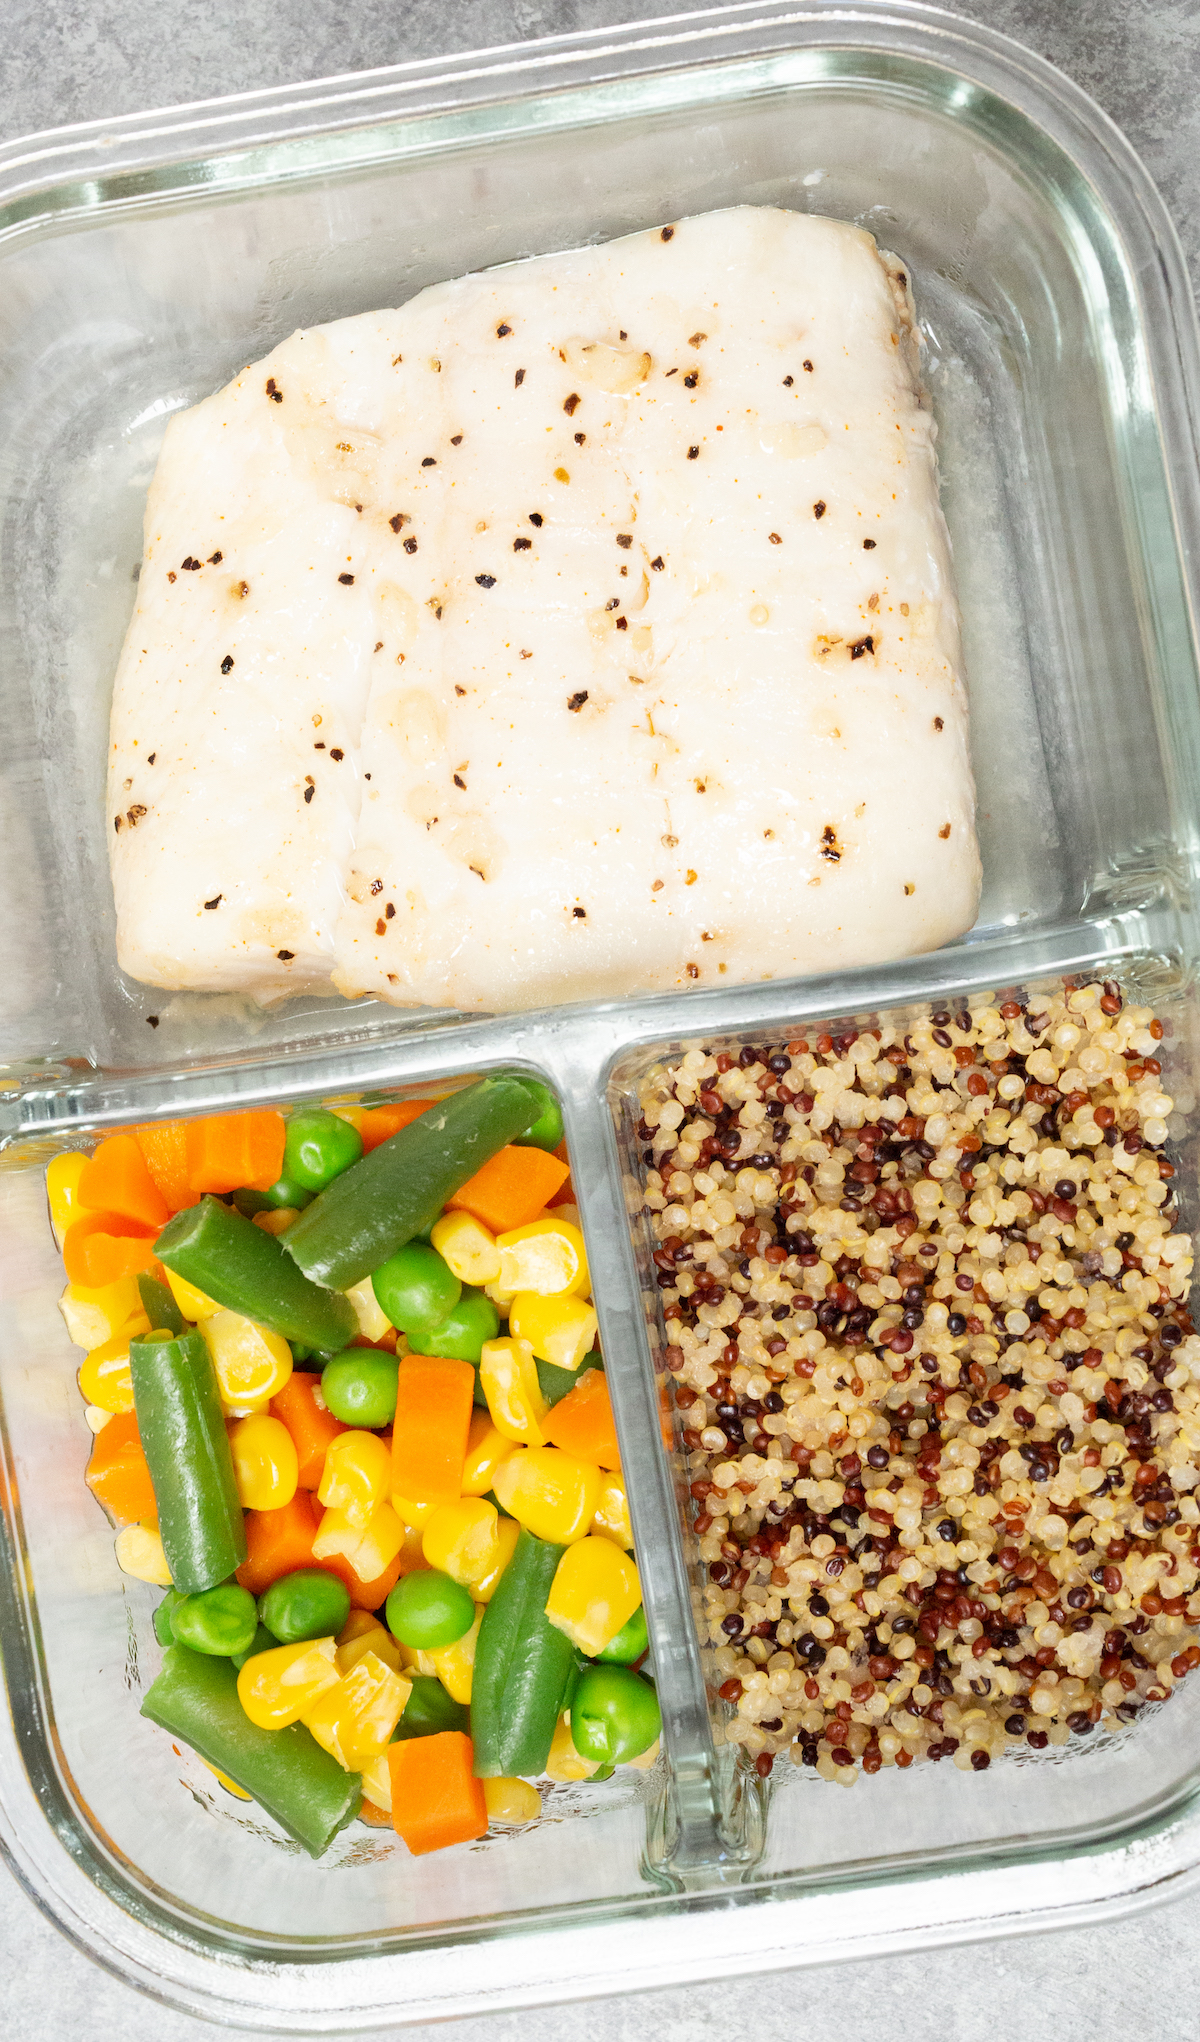 A single glass meal prep container filled with a fish fillet, mixed vegetables, and quinoa.